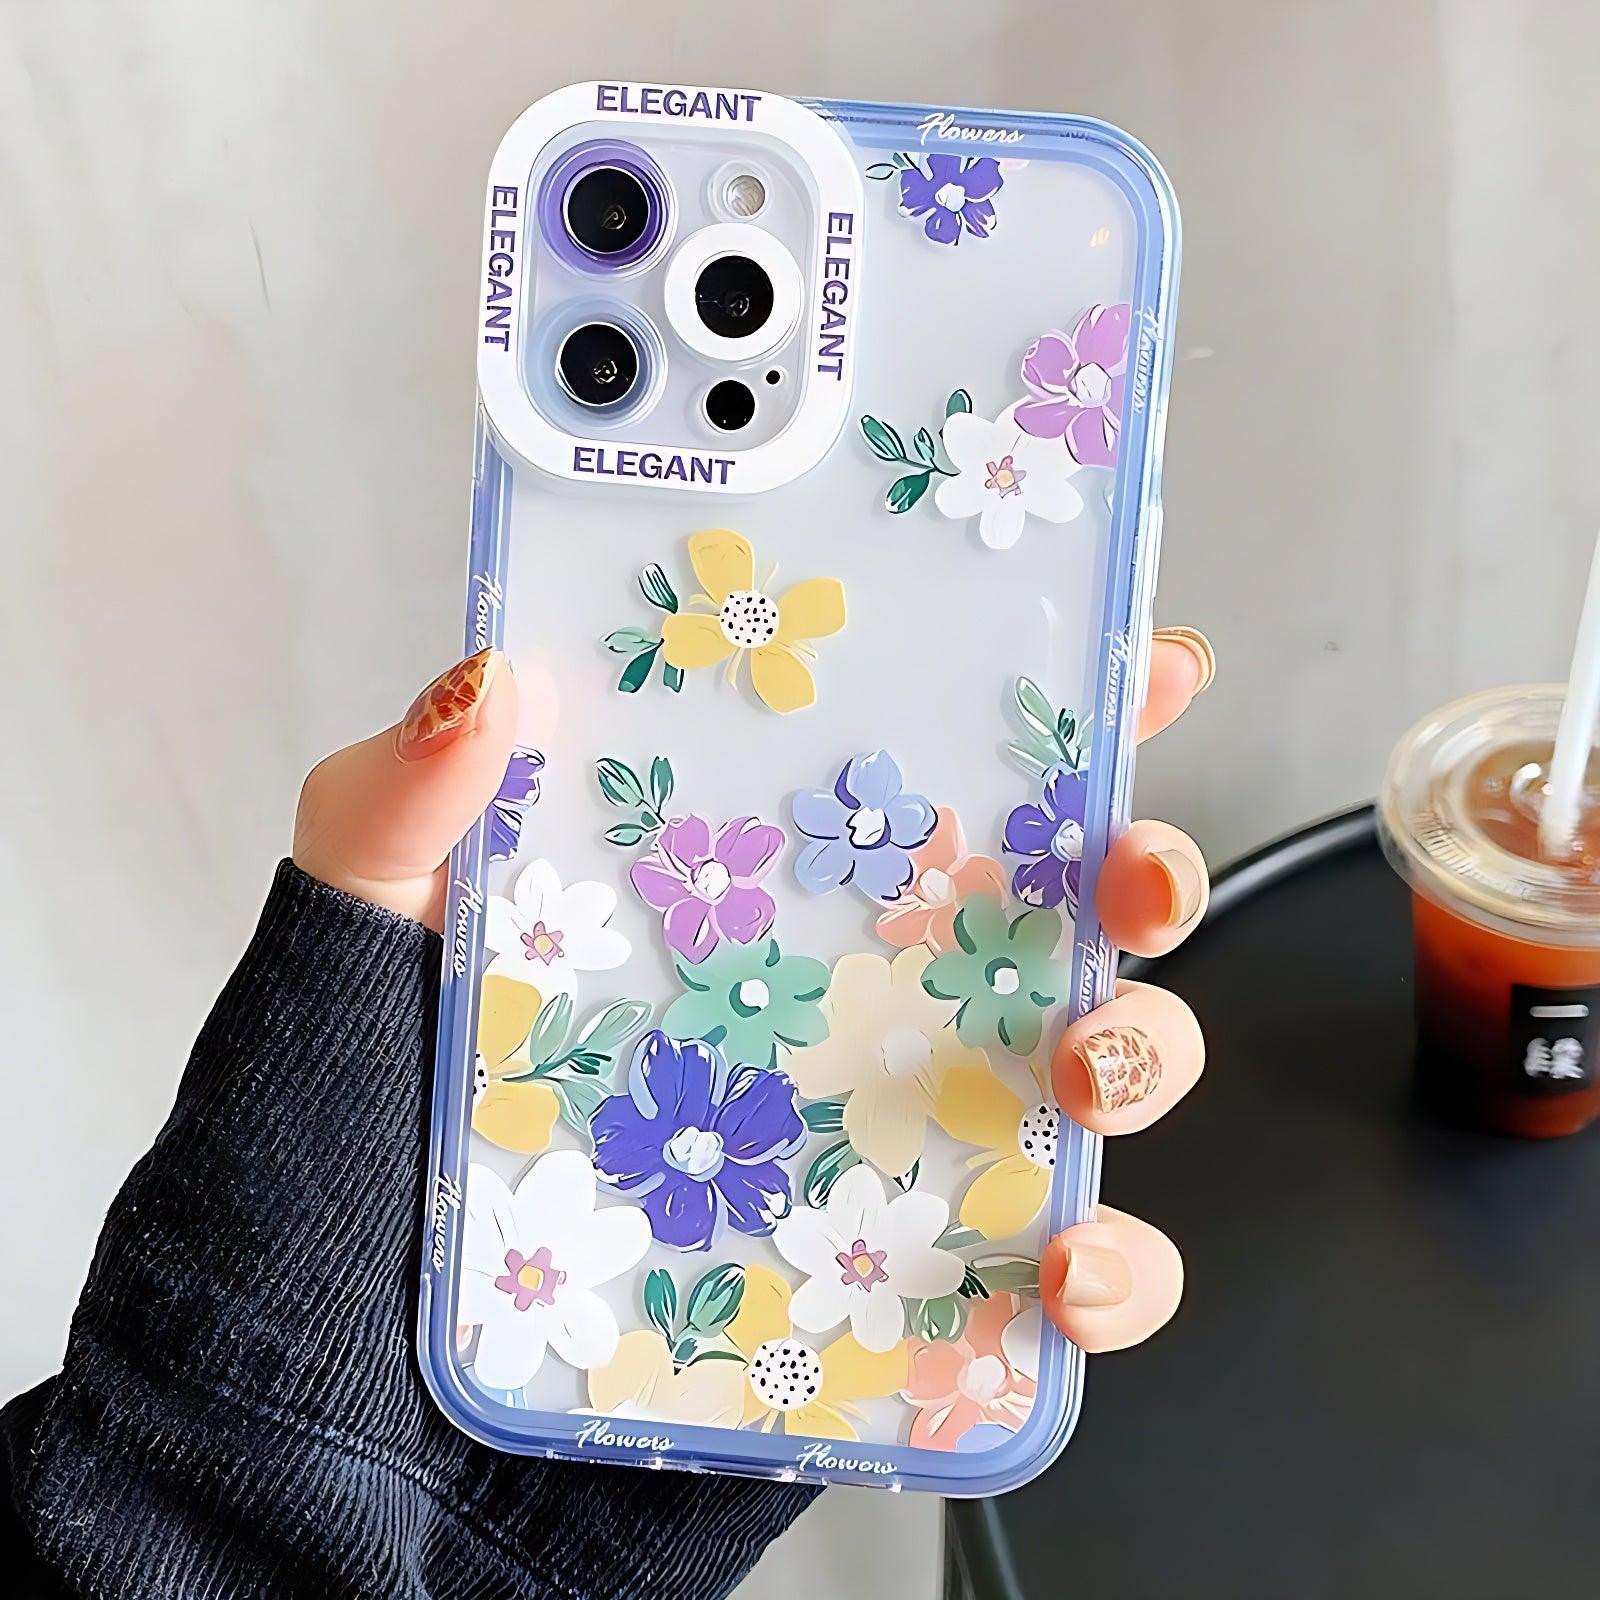 Huawei Mate 10 Pro Cute Phone Cases - Touchy Style .